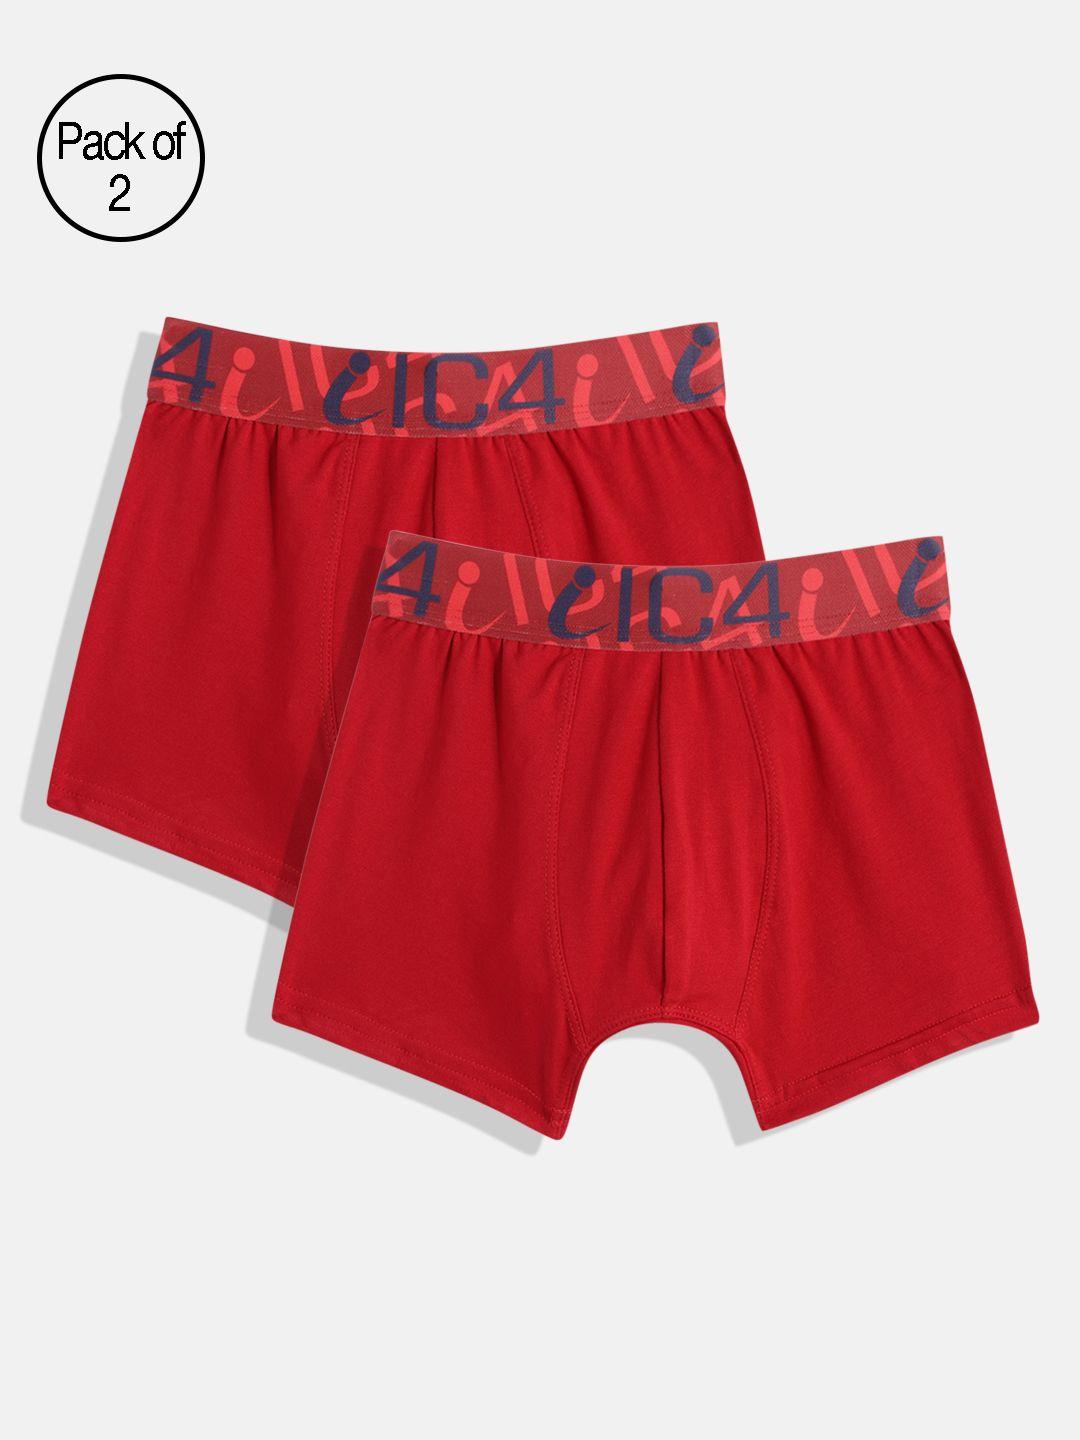 ic4-boys-pack-of-2-red-solid-trunks